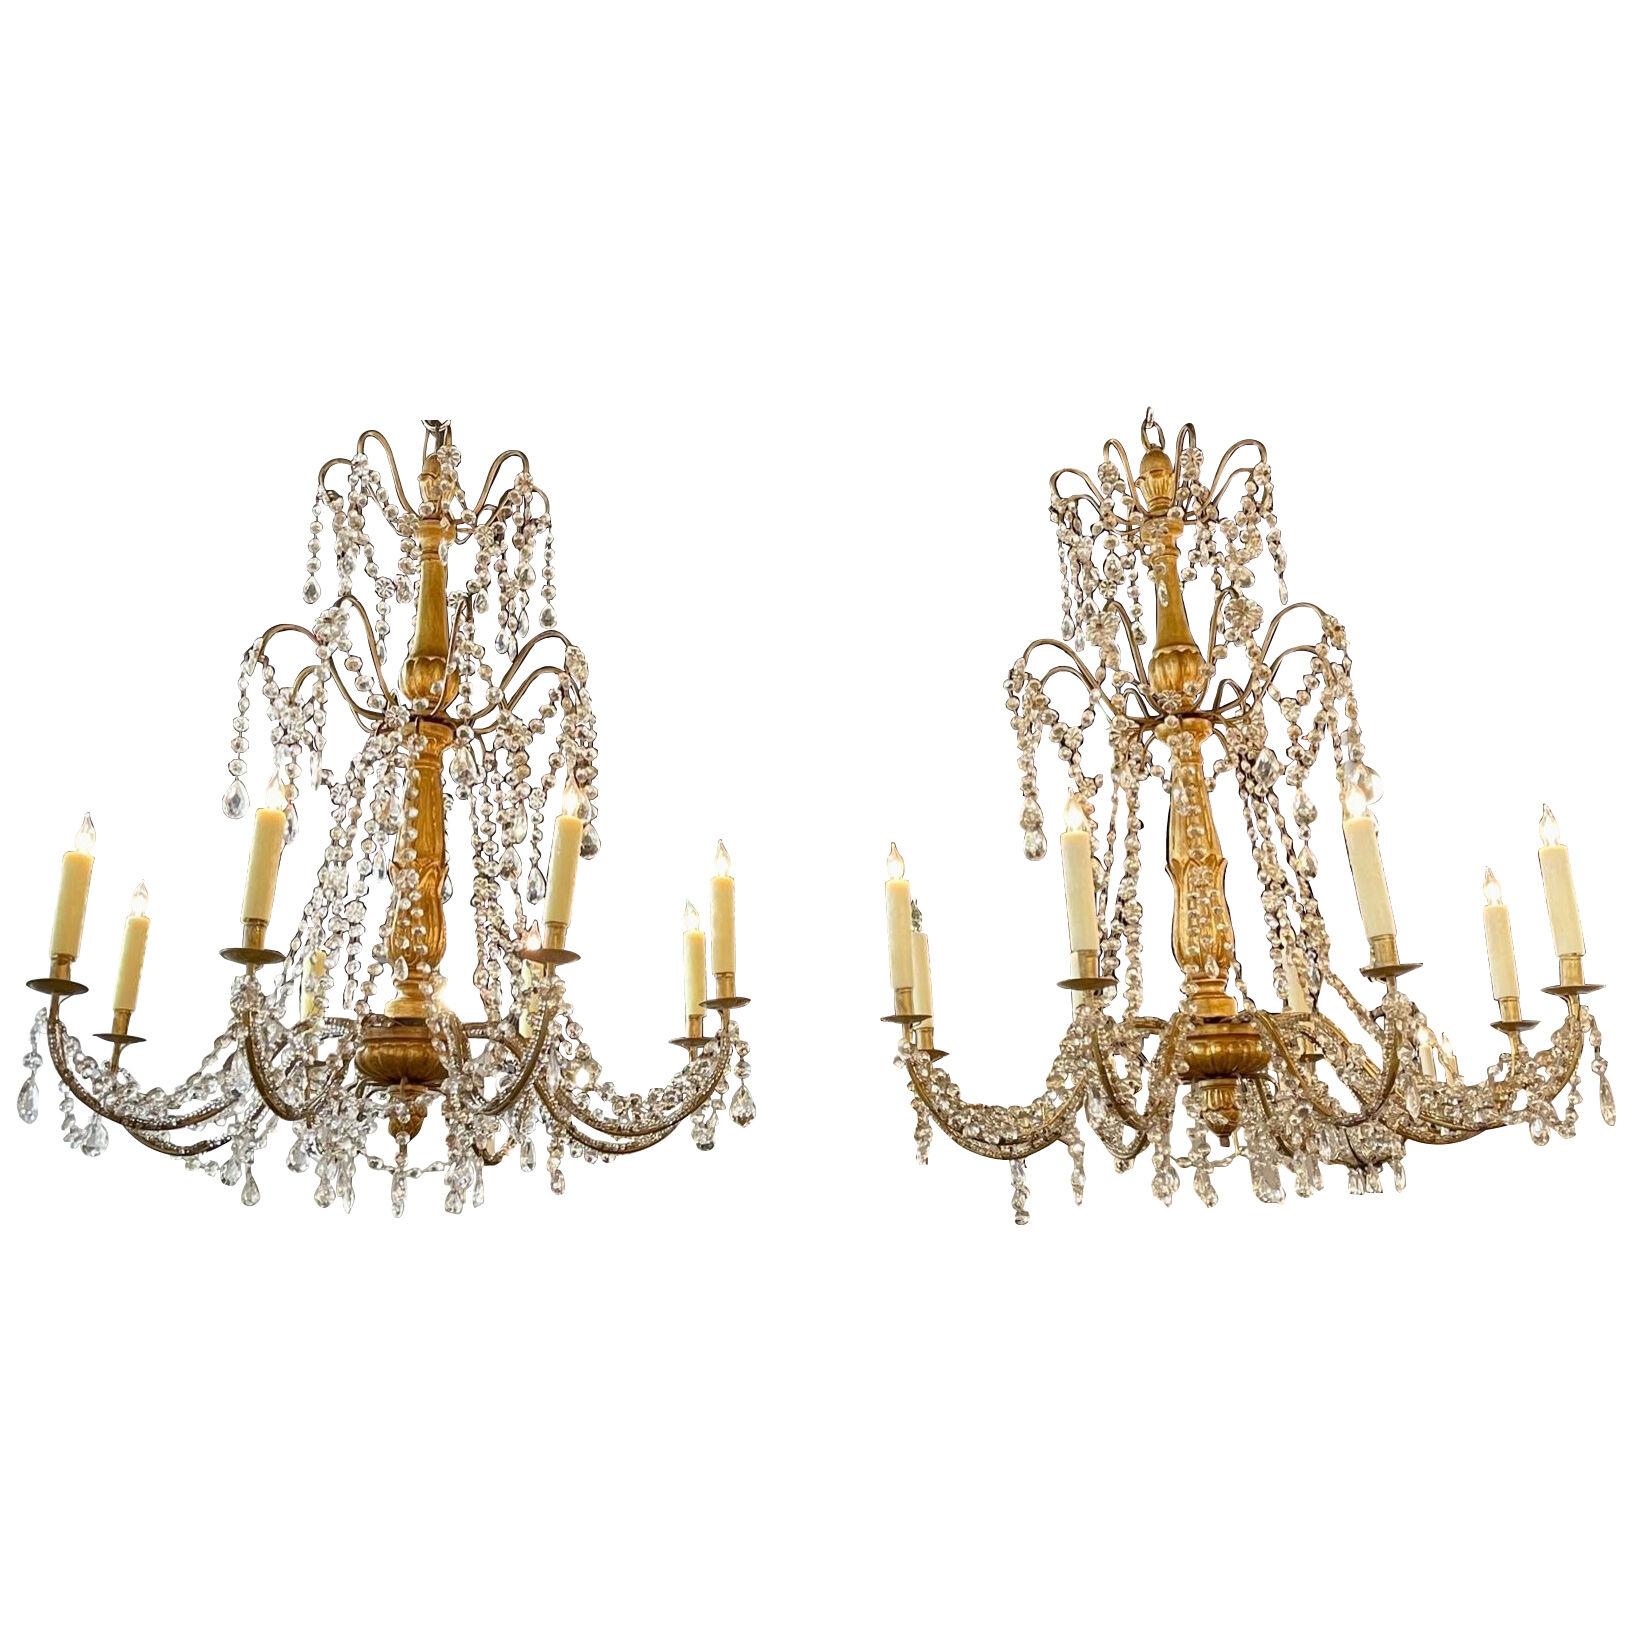 Pair of 19th Century Italian Giltwood and Crystal Chandeliers